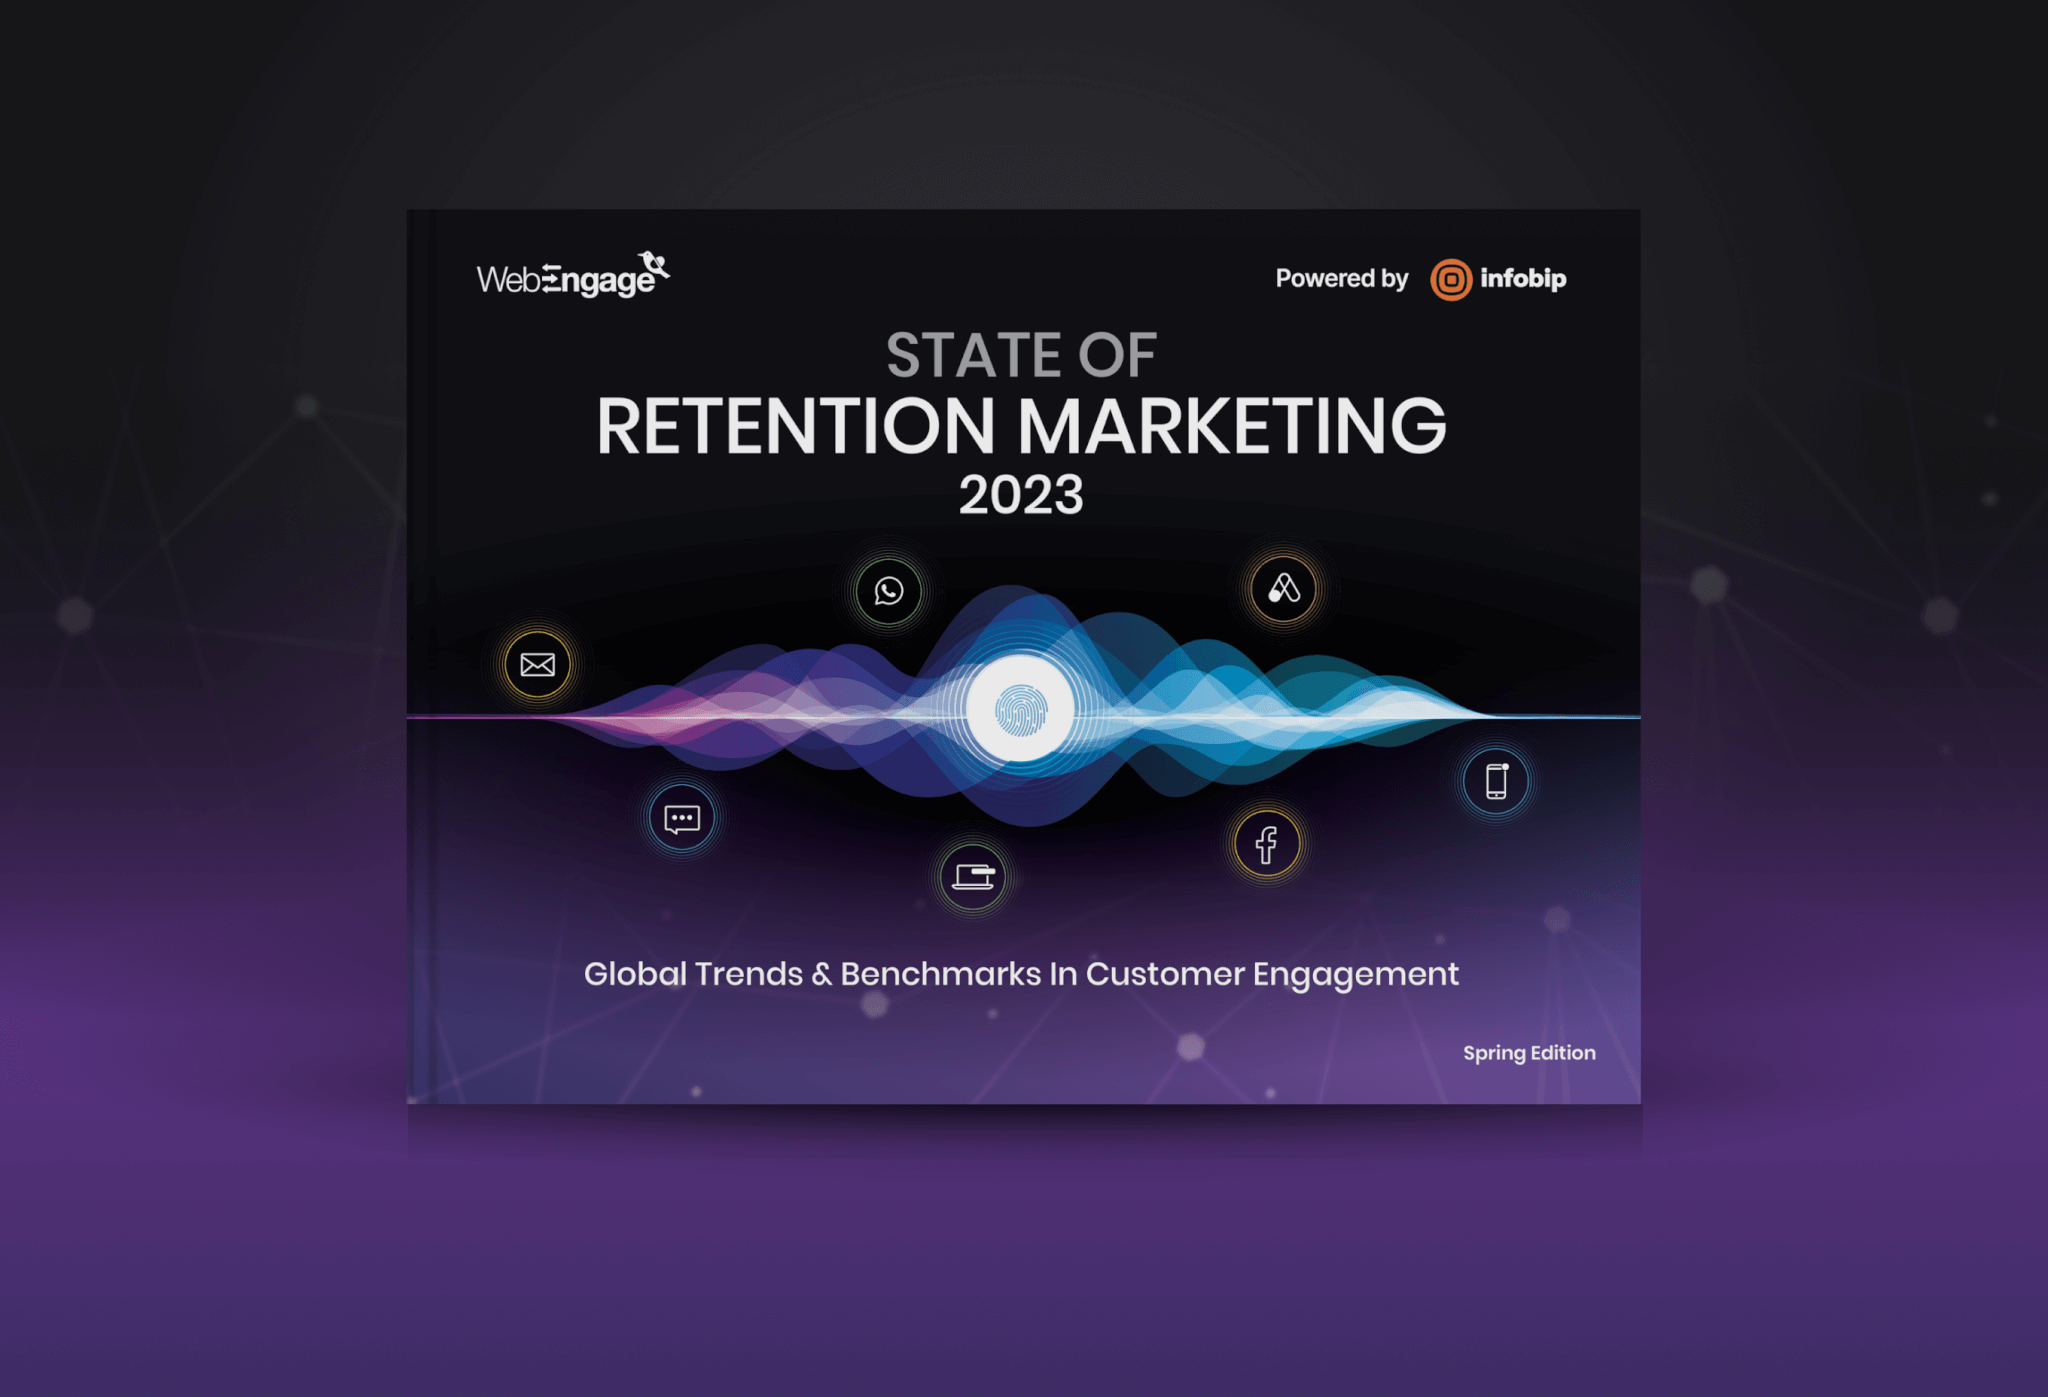 State of Retention Marketing 2023: Global Trends & Benchmarks in Customer Engagement - Spring Edition